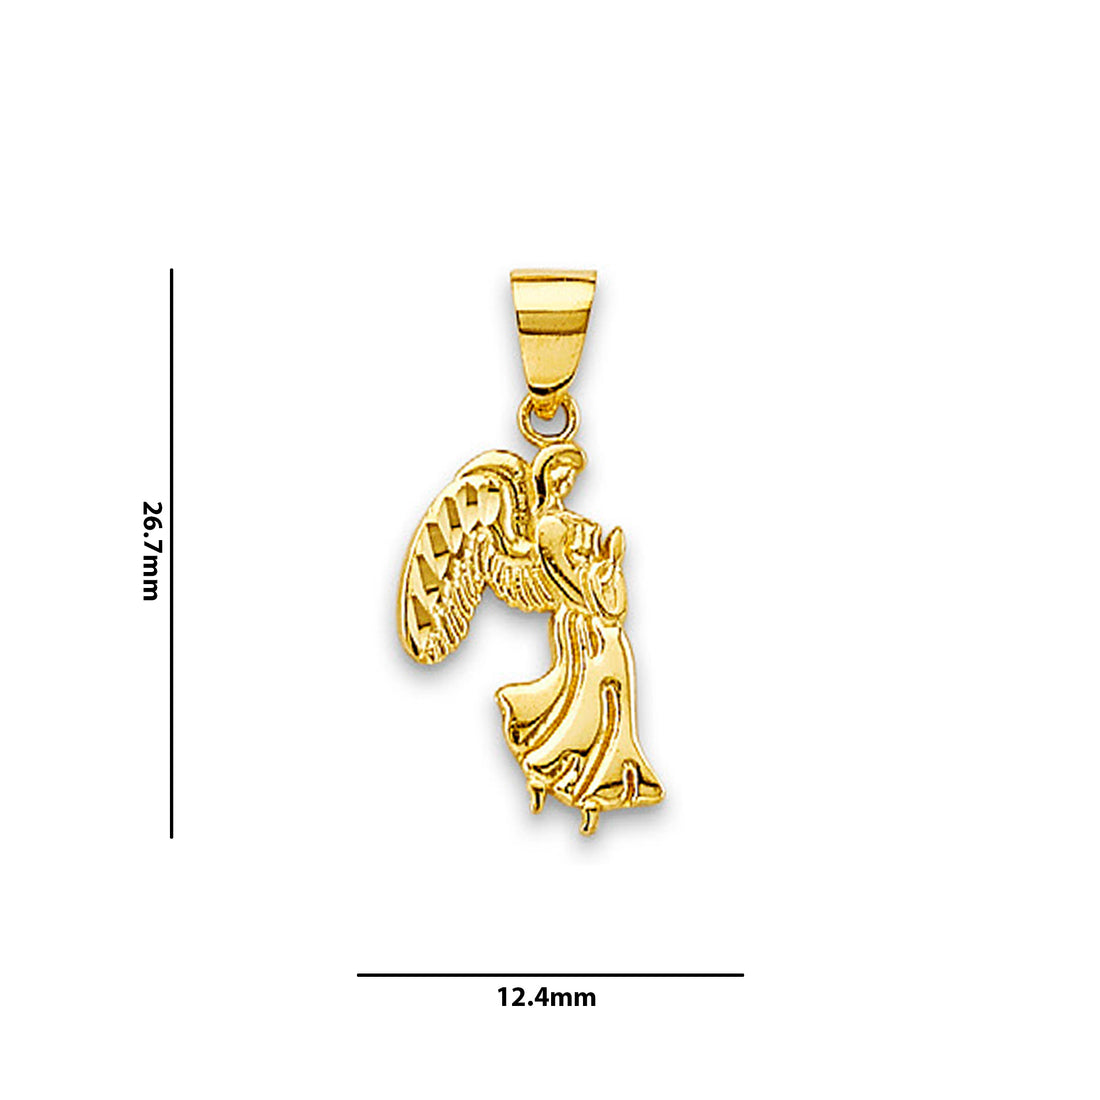 Yellow Gold Praying Angel Religious Charm Pendant with Measurement